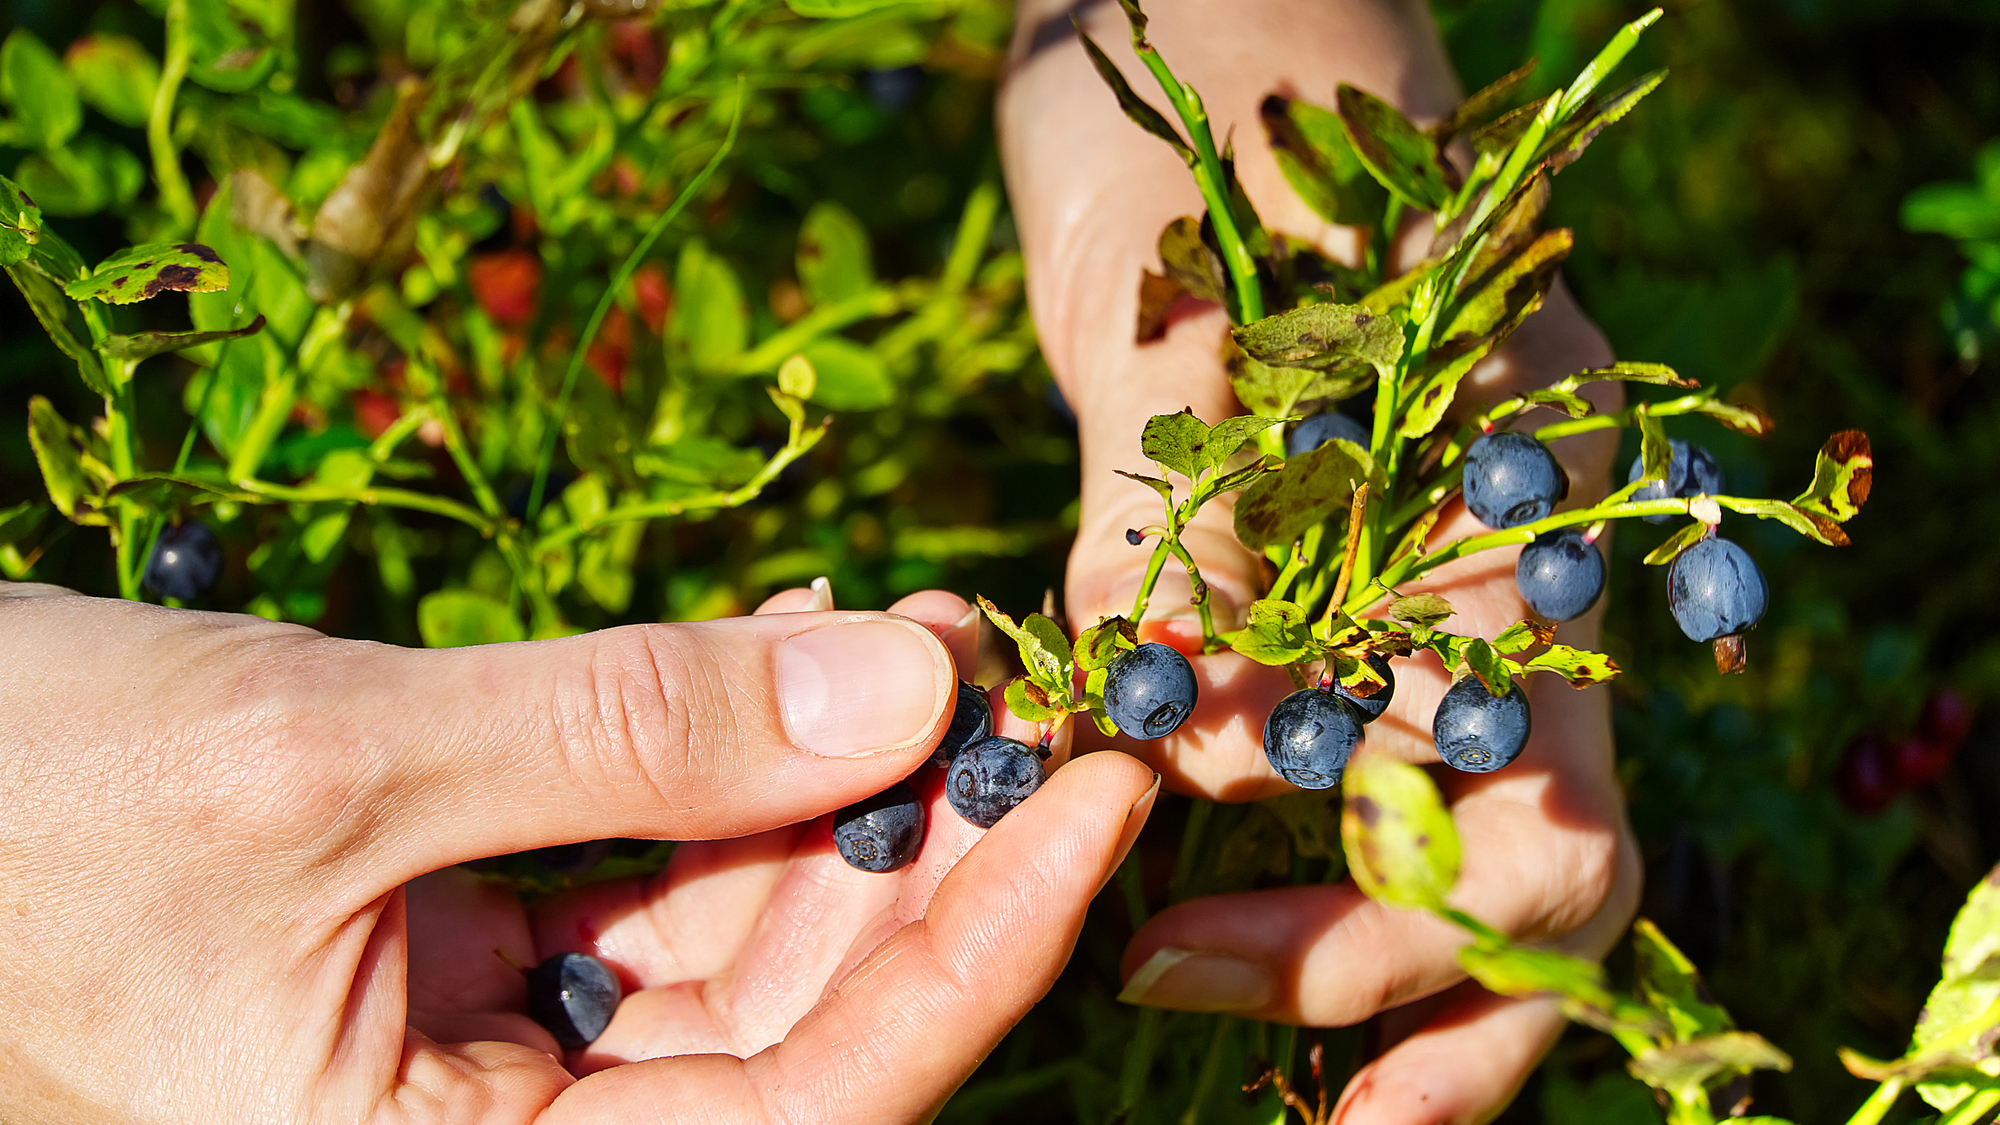 Researchers analyzed data from 457 adults who played an online foraging game.